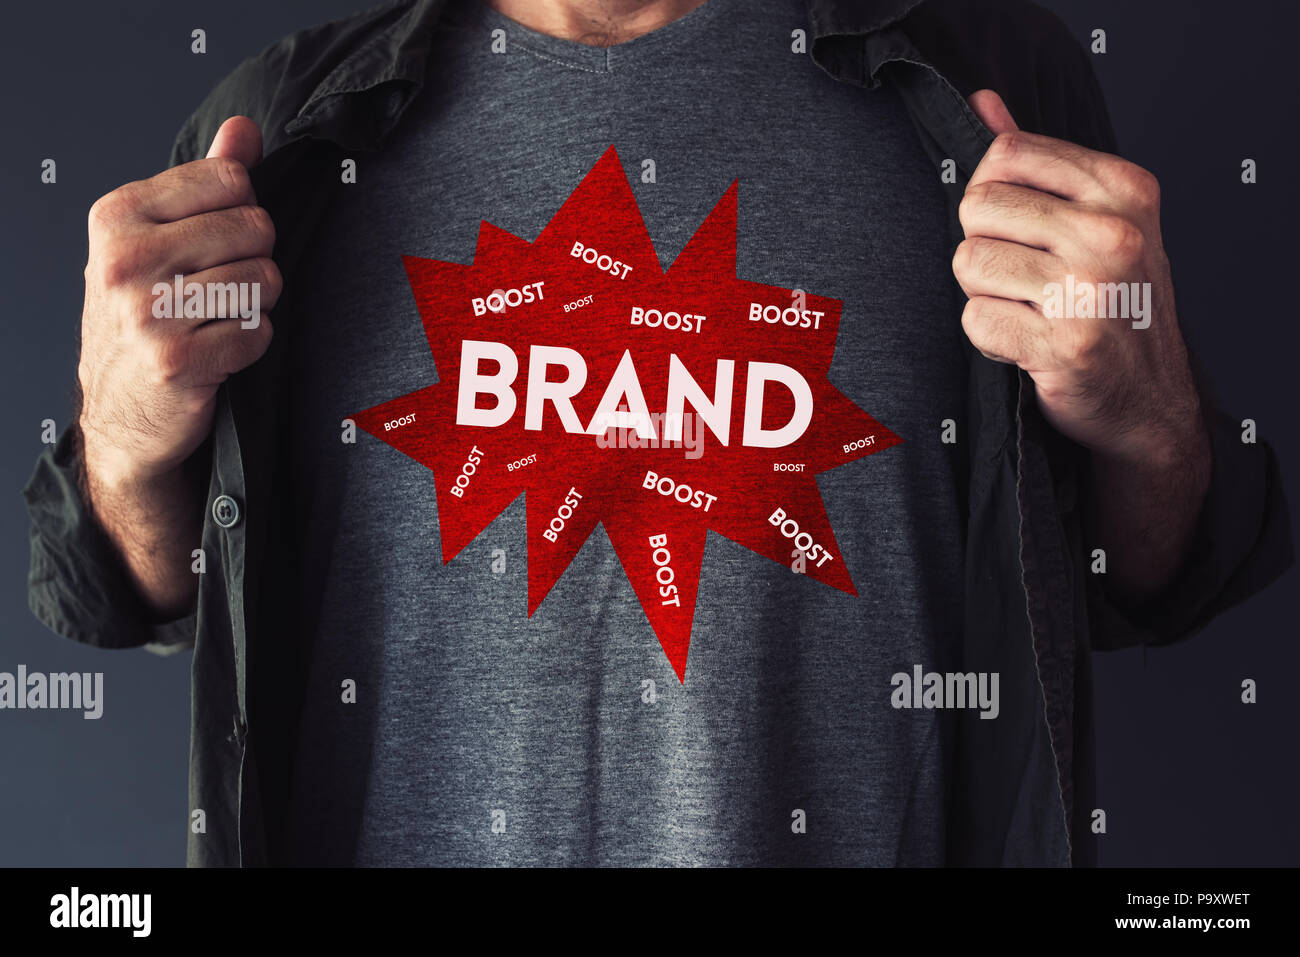 Brand boosting concept with handsome guy showing t-shirt with text mock up Stock Photo